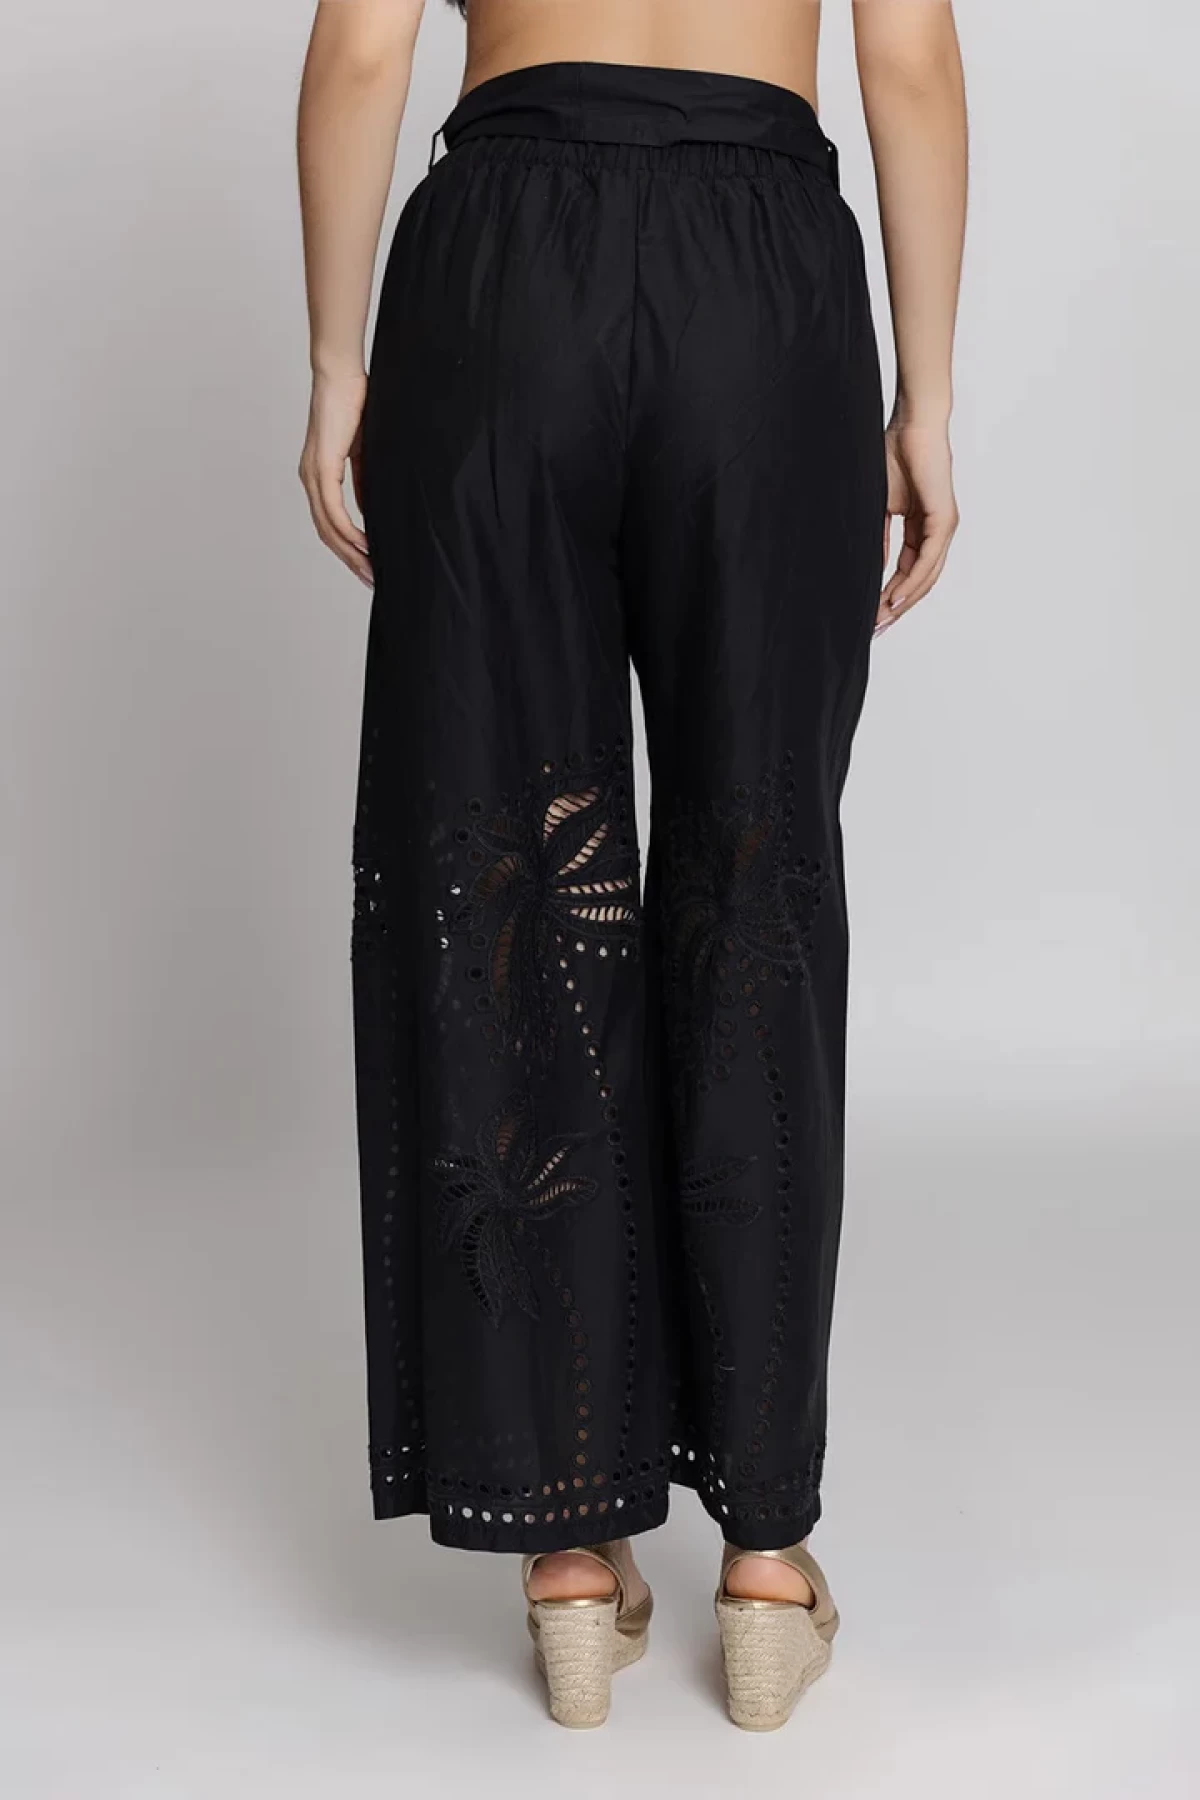 EMBROIDERED PANTS